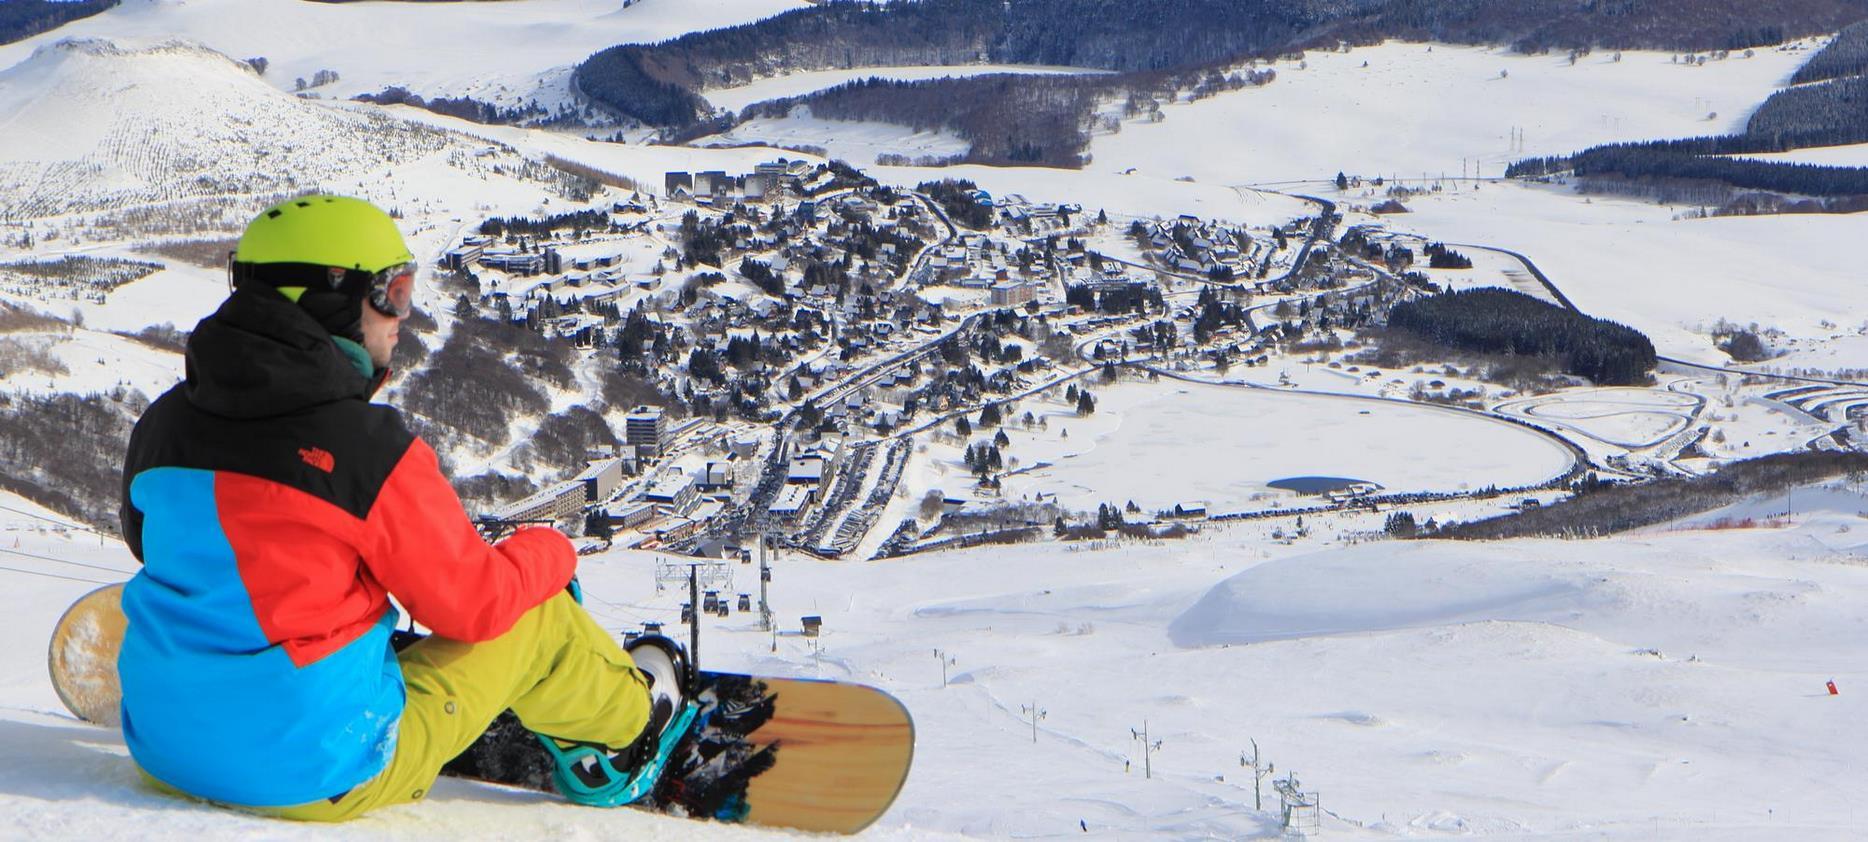 Super Besse - on Snowboard, view of the resort of Super Besse